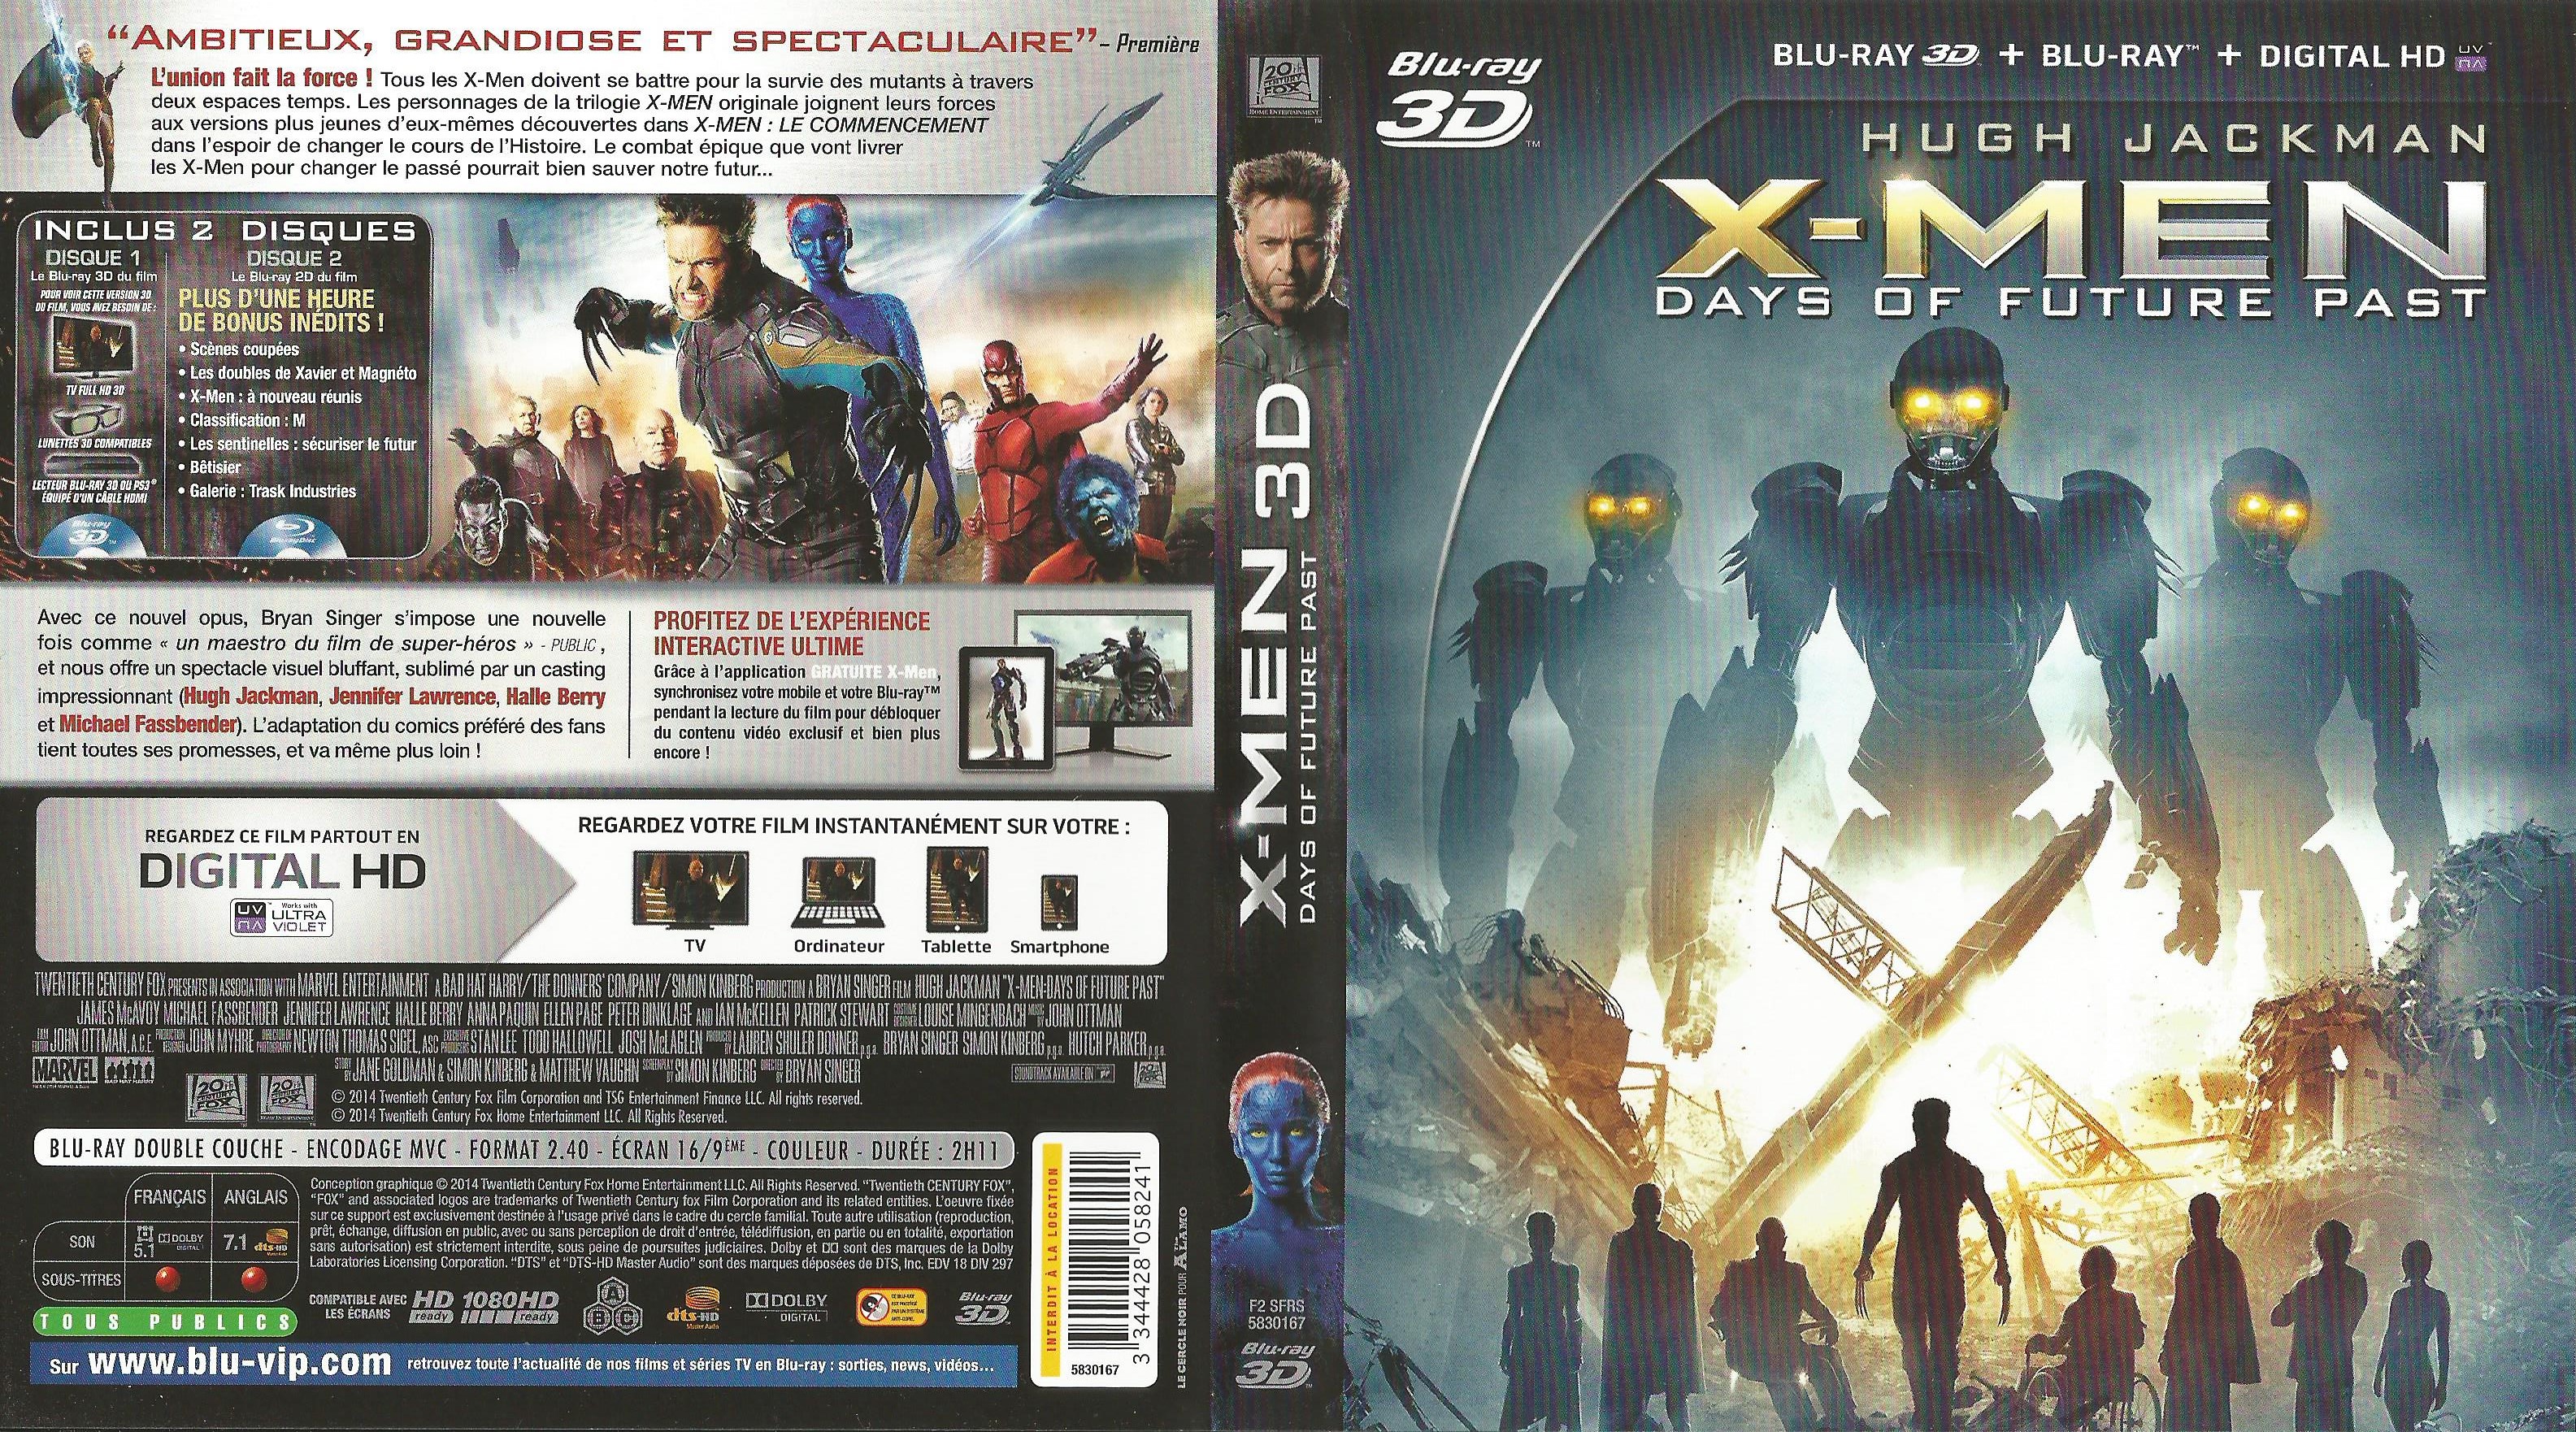 Jaquette DVD X-Men: Days of Future Past 3D (BLU-RAY)